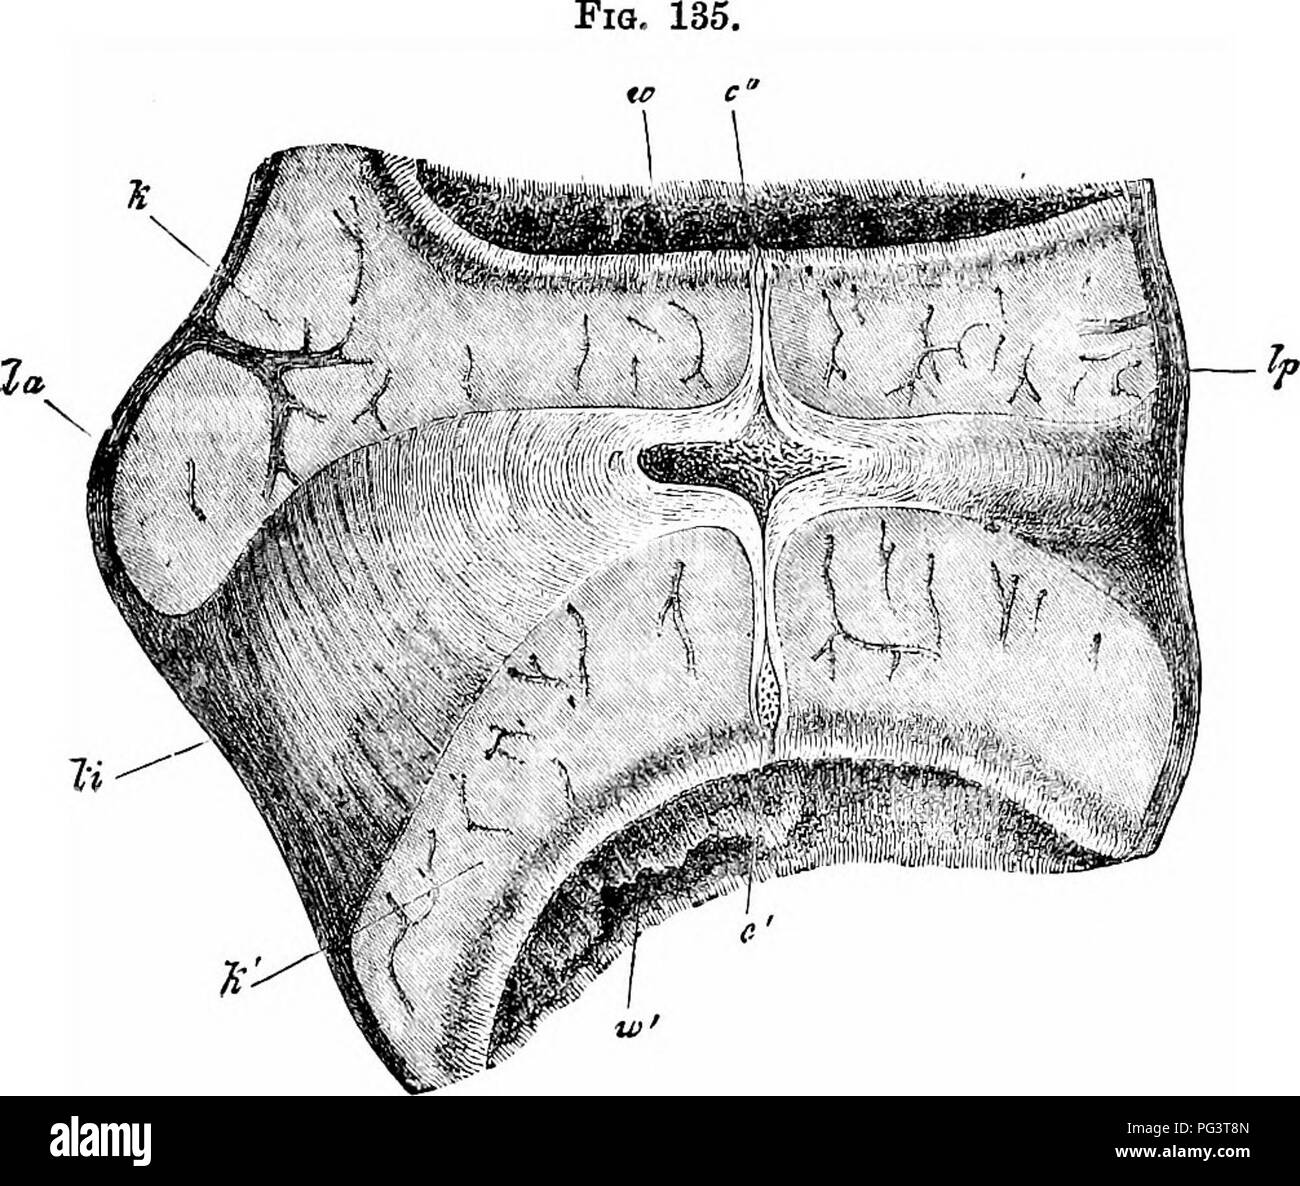 . The elements of embryology . Embryology. 402 DEVELOPMENT OF ORGANS IN MAMMALIA. [CHAP.. Longitudinal Section through the Intervertebral Liga- ment AND ADJACENT PARTS OF TwO VeRTEBR^ PEOM THE Thoracic Eegion of an advanced Embryo op a Sheep. (From Kolliker.) la. ligamentum longitudinale anterius ; Ip. ligamentum long, pos- terius; li. ligamentum intervertebrale; k, k'. epiphysis of vertebra ; w. and y/. anterior and posterior vertebrse ; c. in- tervertebral dilatation of notocbord ; c' and c&quot;- vertebral di- latation of notochord. The early changes in the development of the visceral arche Stock Photo